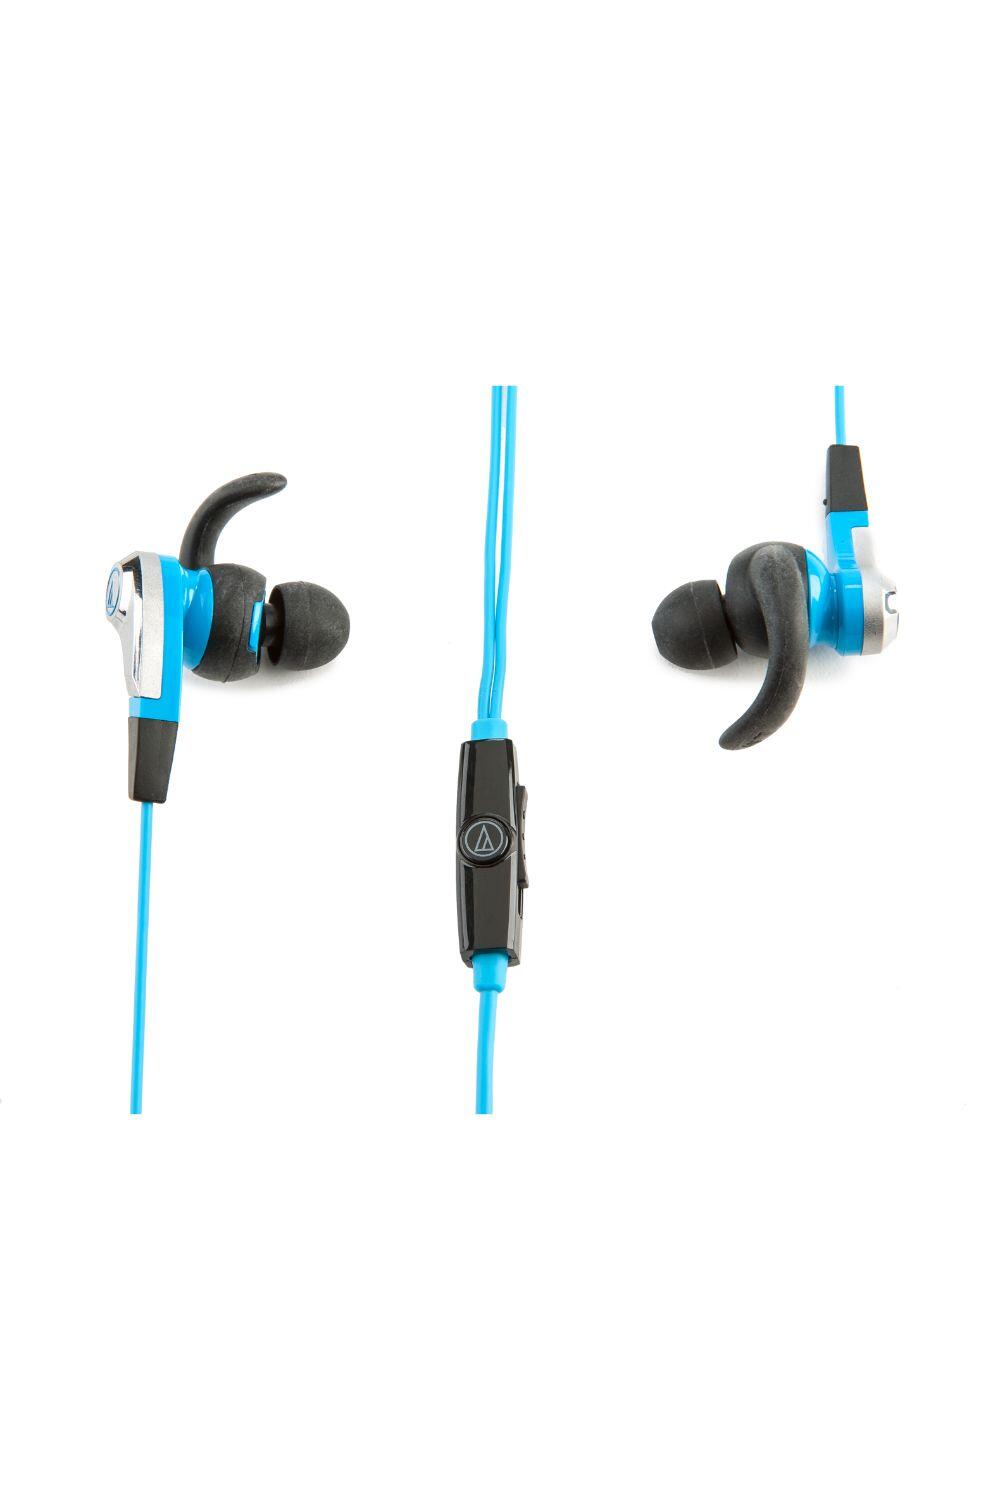 Audio-Technica ATH-CKX5iS In-Ear Headphones With Mic 2/3